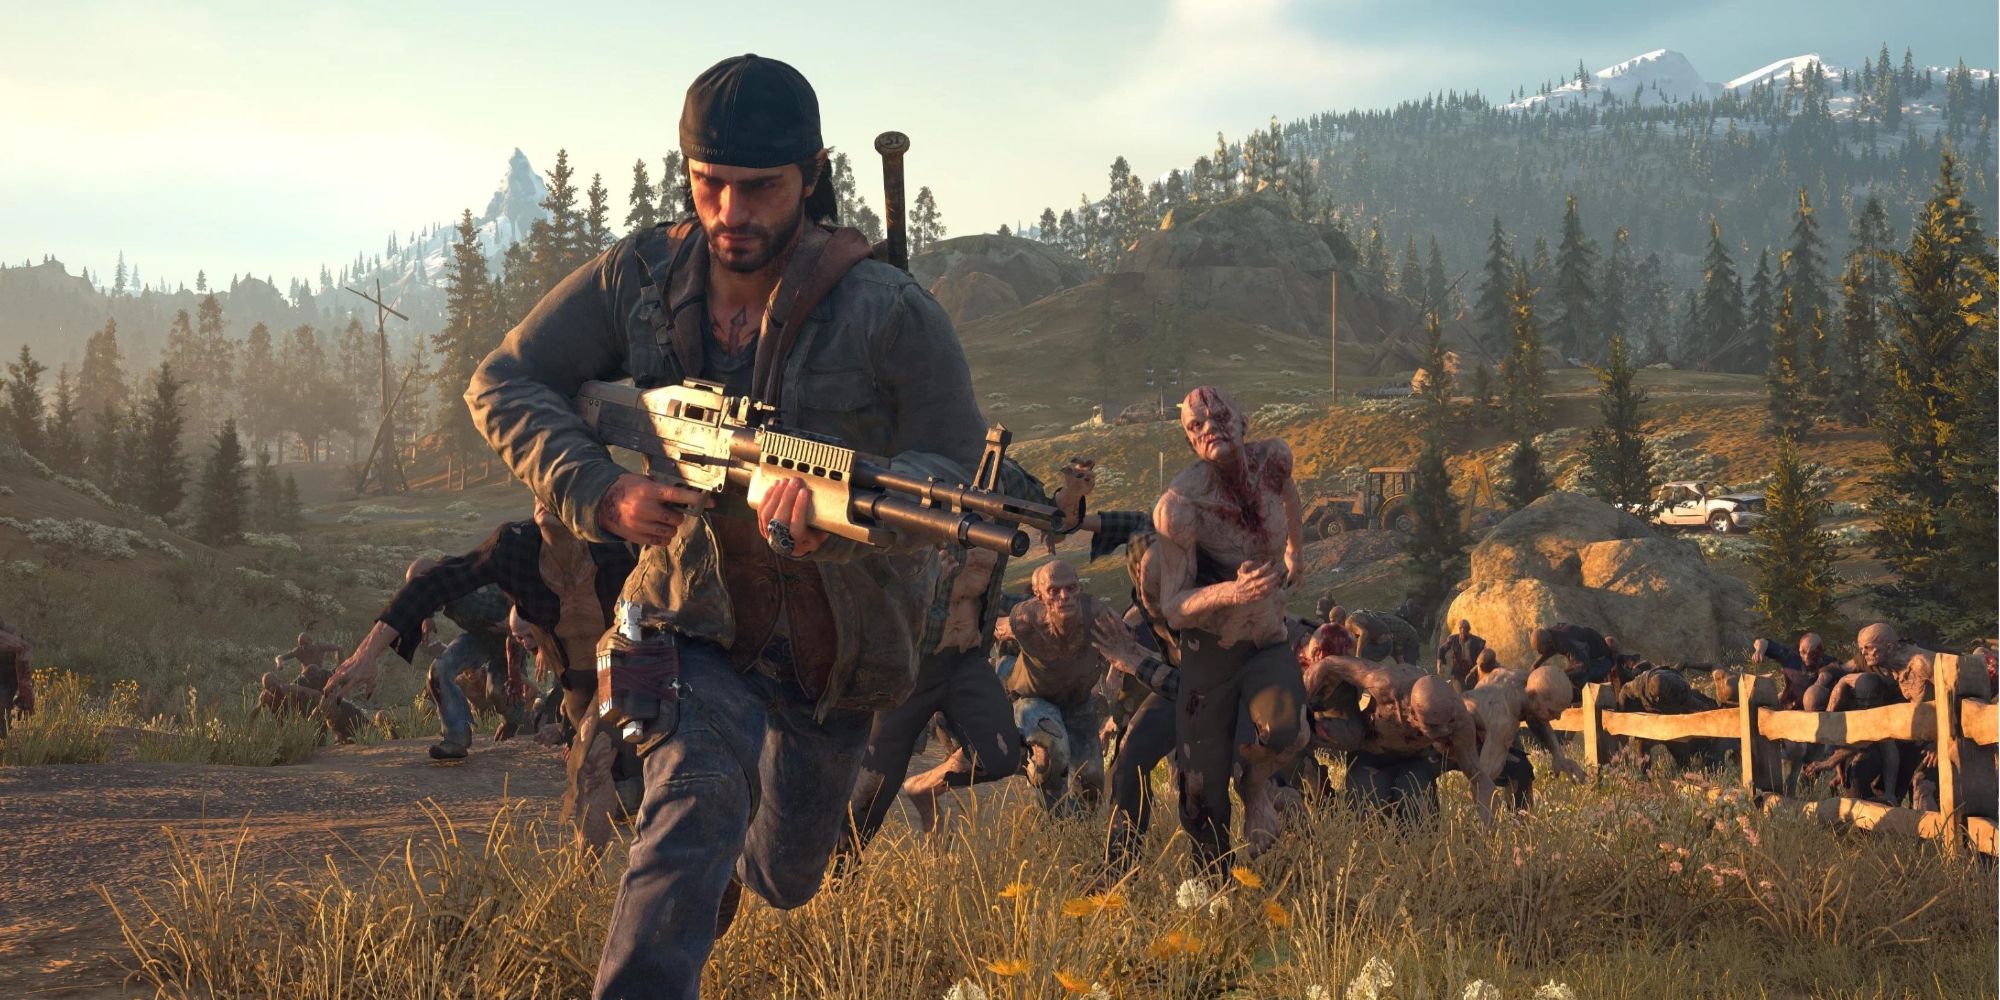 Days Gone has some really intense zombie fights